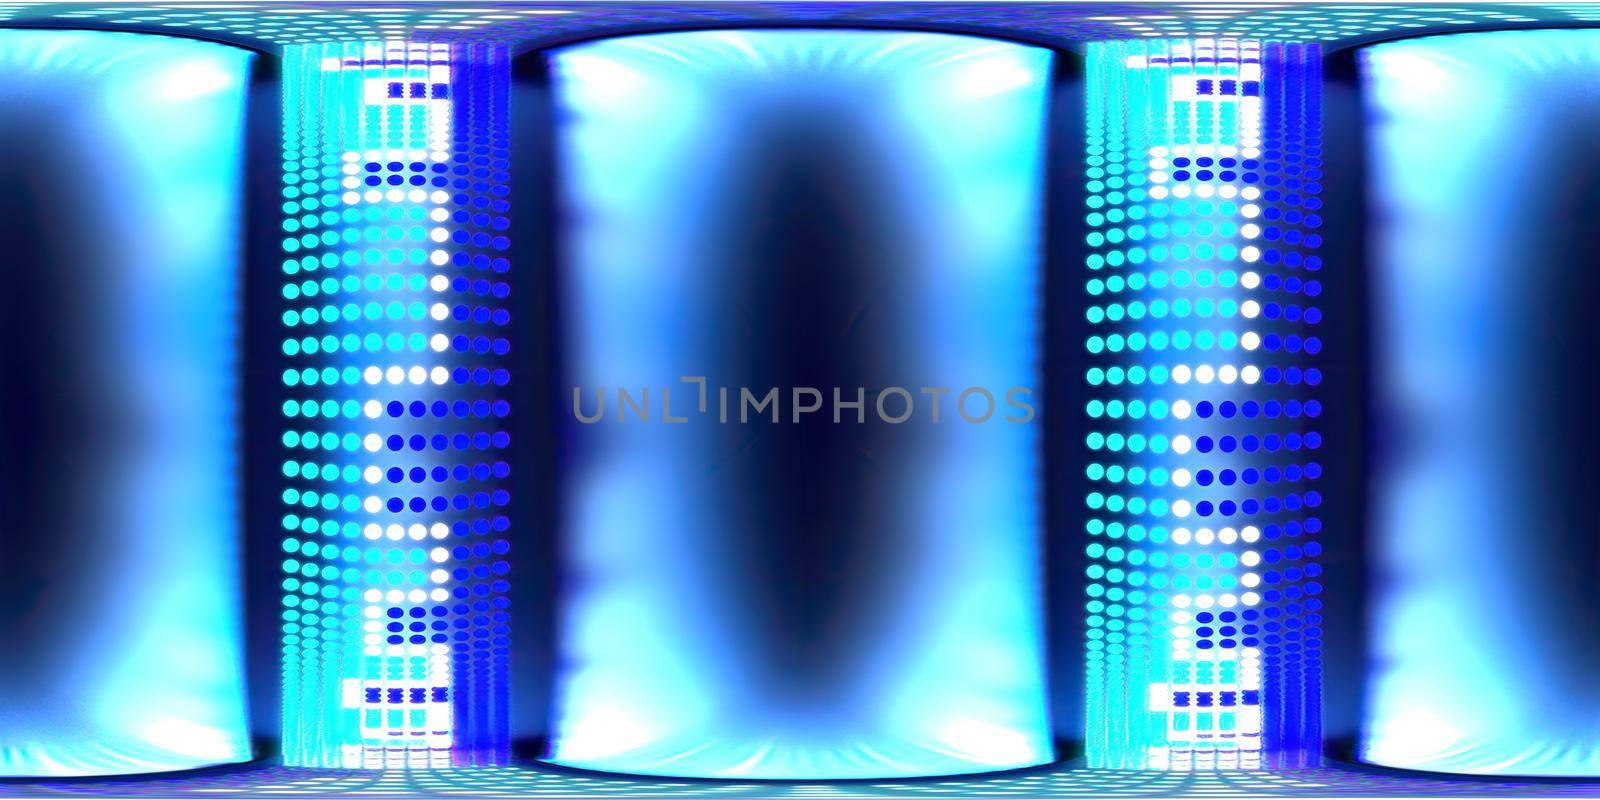 3d illustration, 3d rendering, vr 360 panorama abstract images of the cicle background, the path to light, blue background Alternating white cicle light